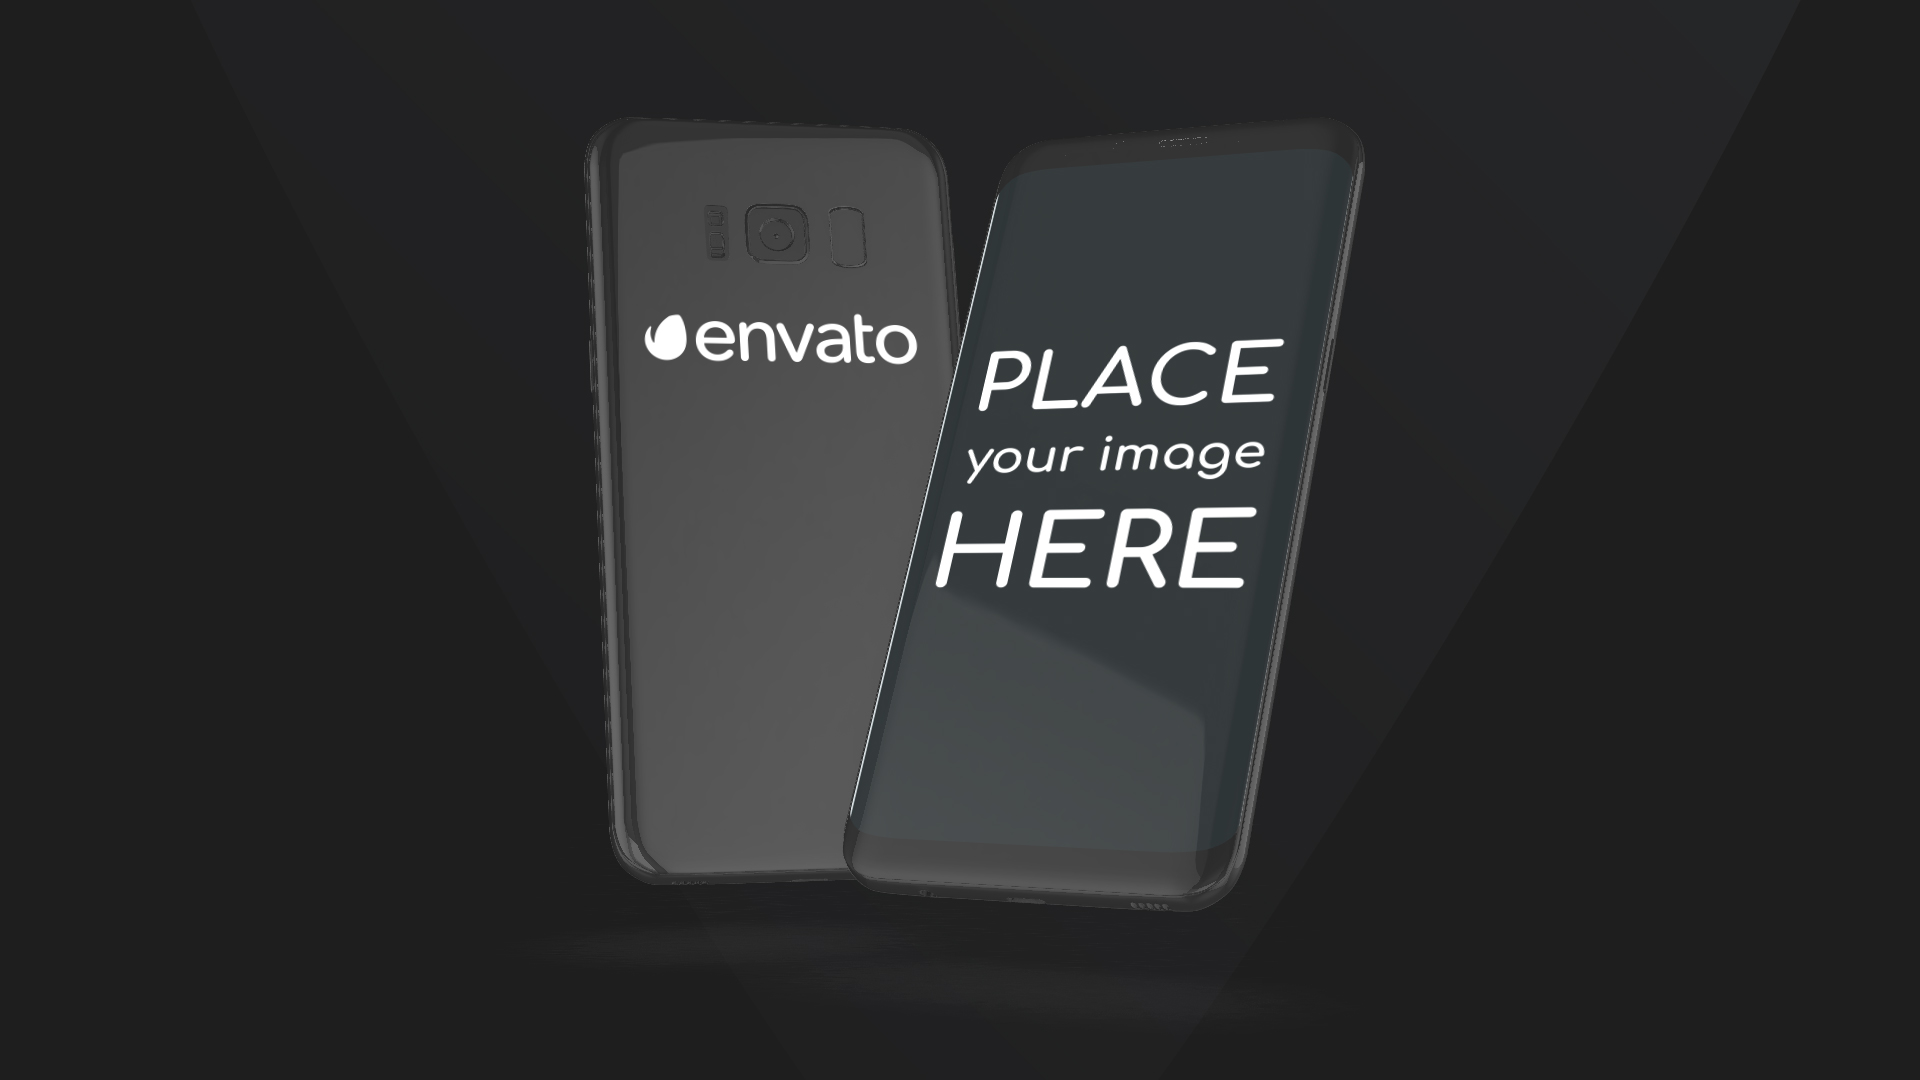  Android App Promo - Phone Mockup 